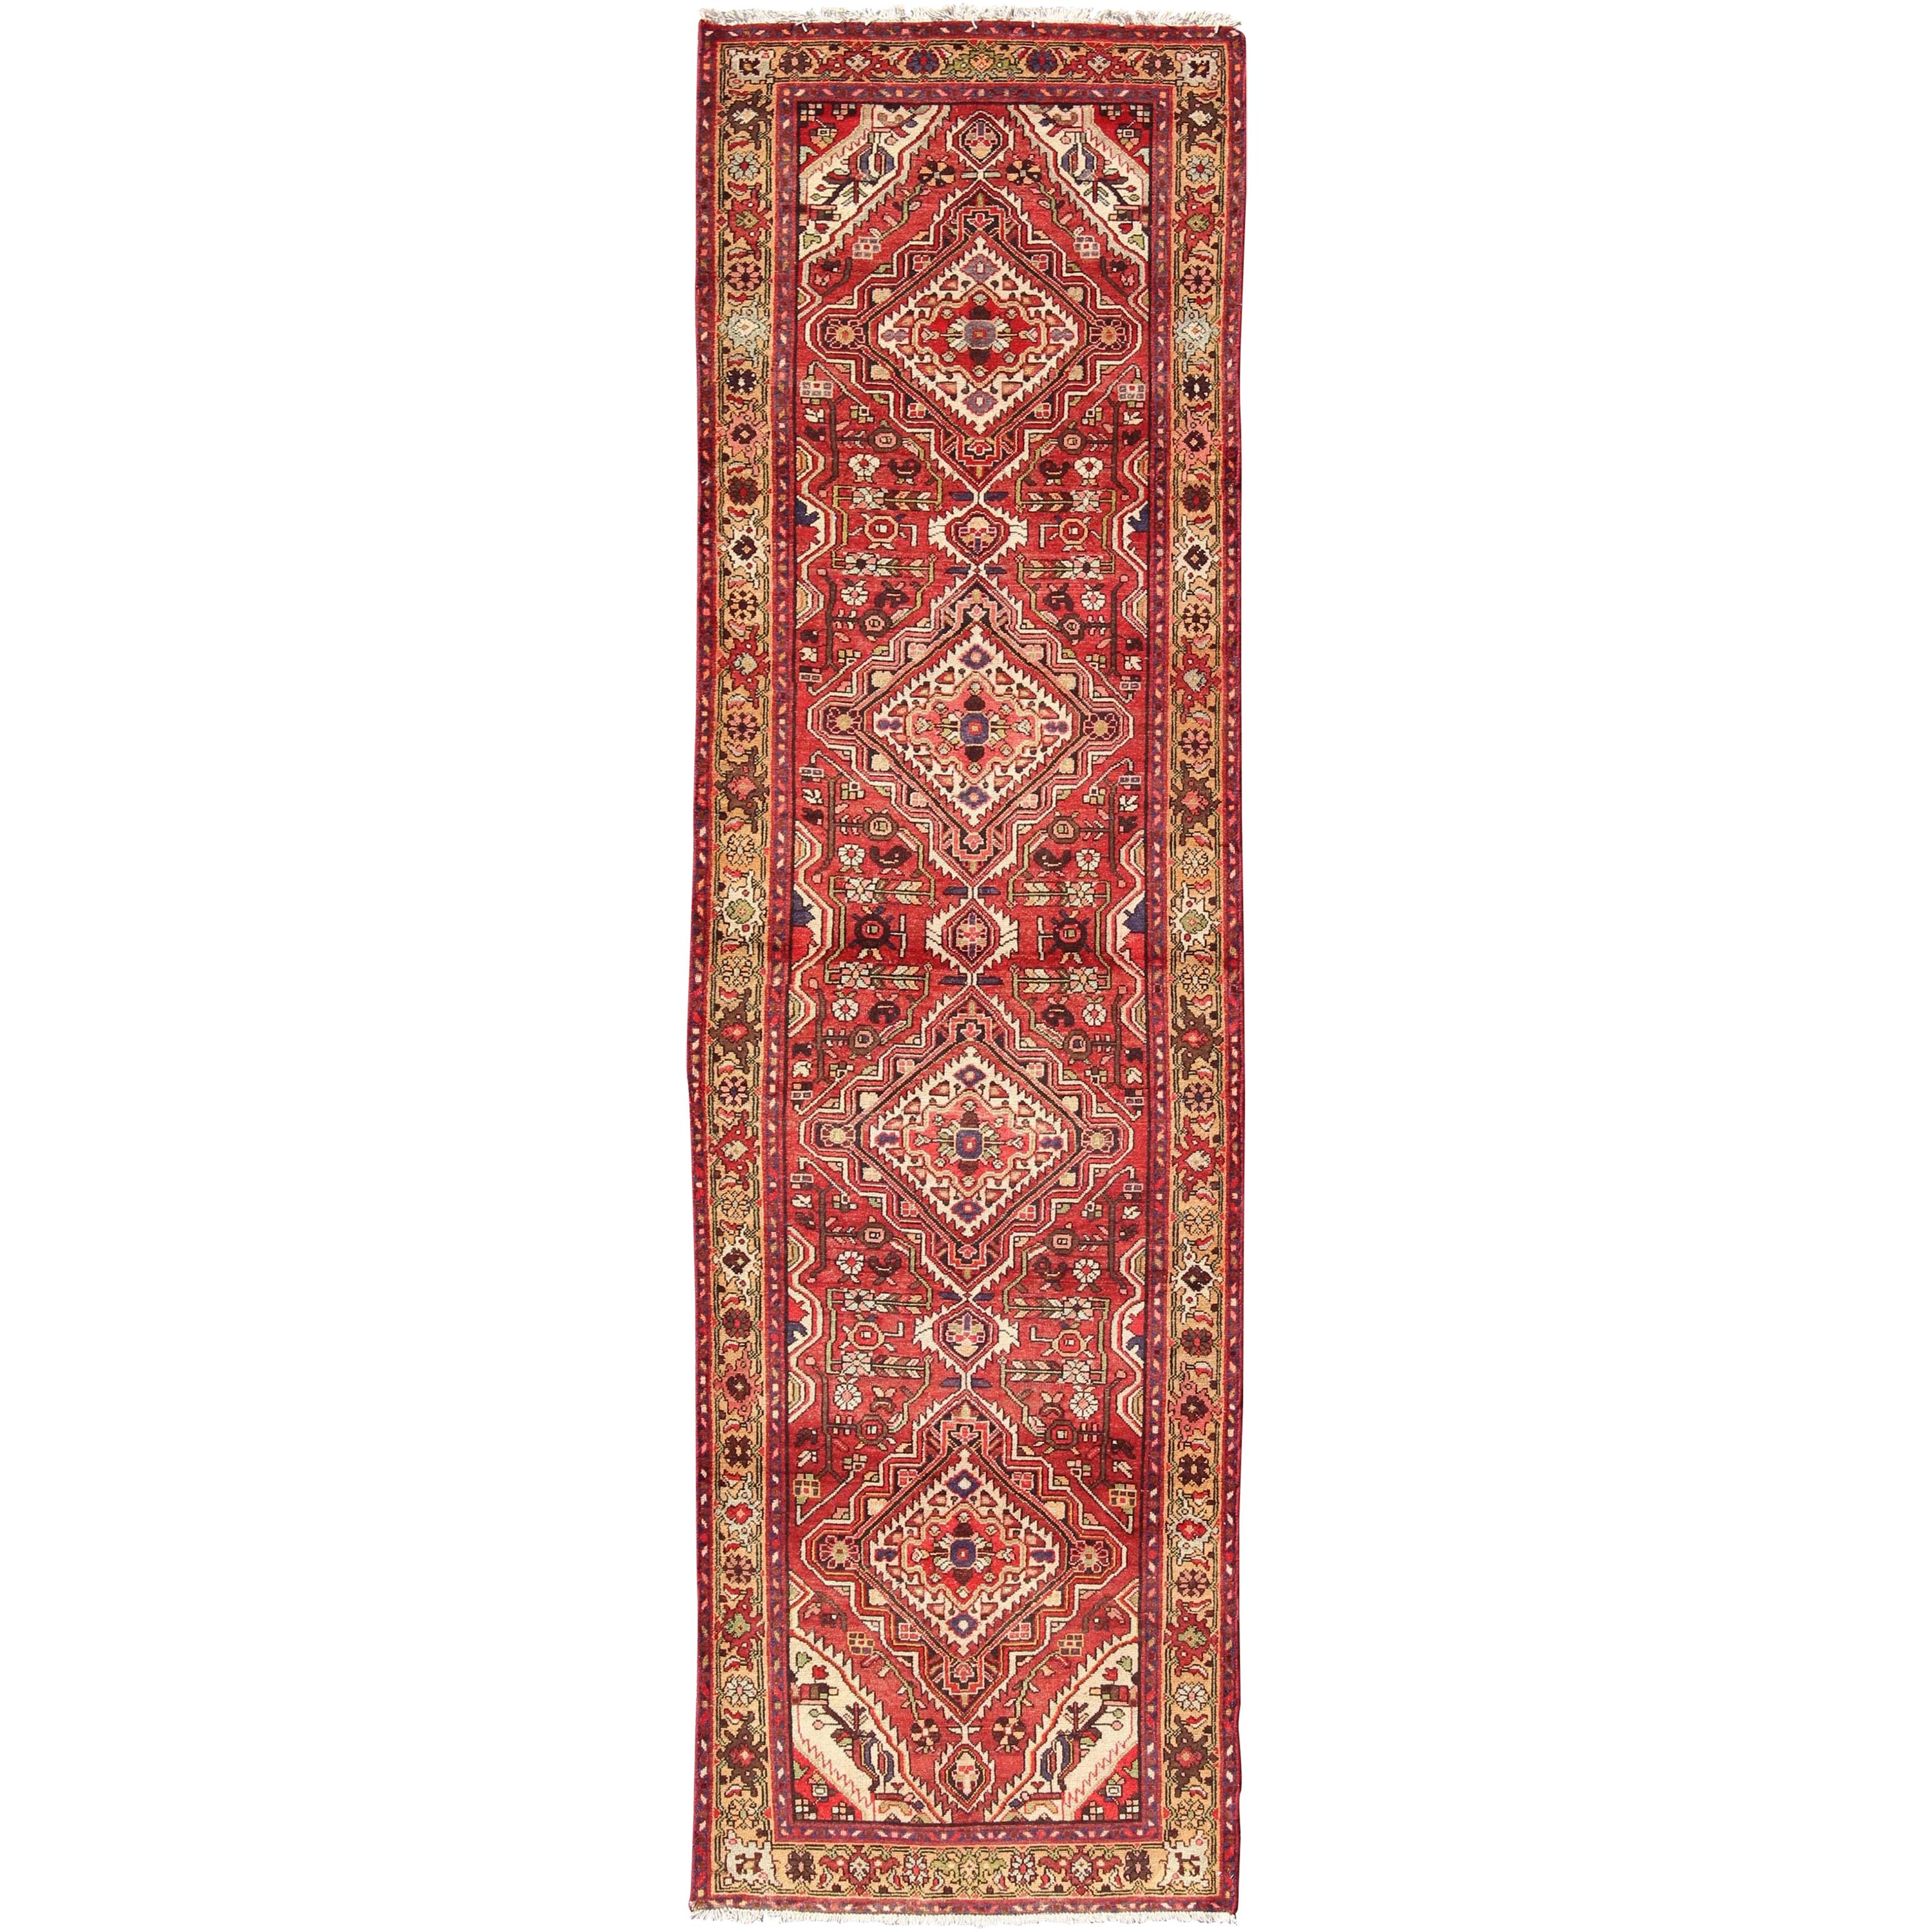 Antique Persian Malayer Runner with Medallion Design in Beautiful Red and Khaki